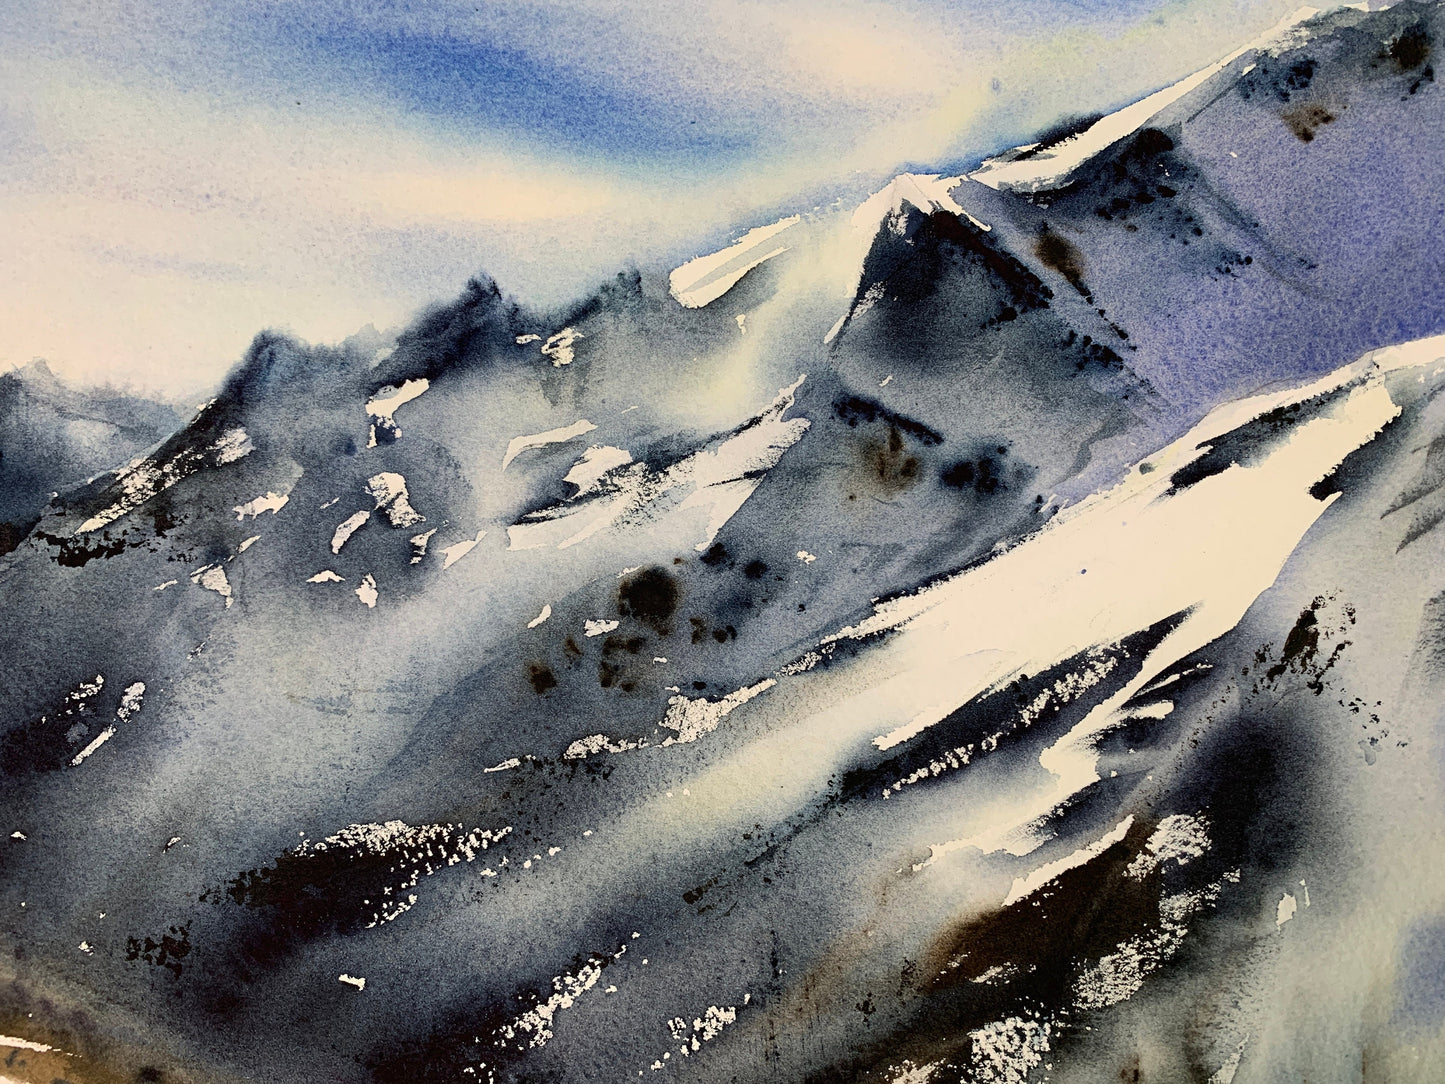 Snowy Mountains Painting, Watercolor Landscape Original, Abstract Mountain, Modern Bedroom Wall Art, Scenery Painting